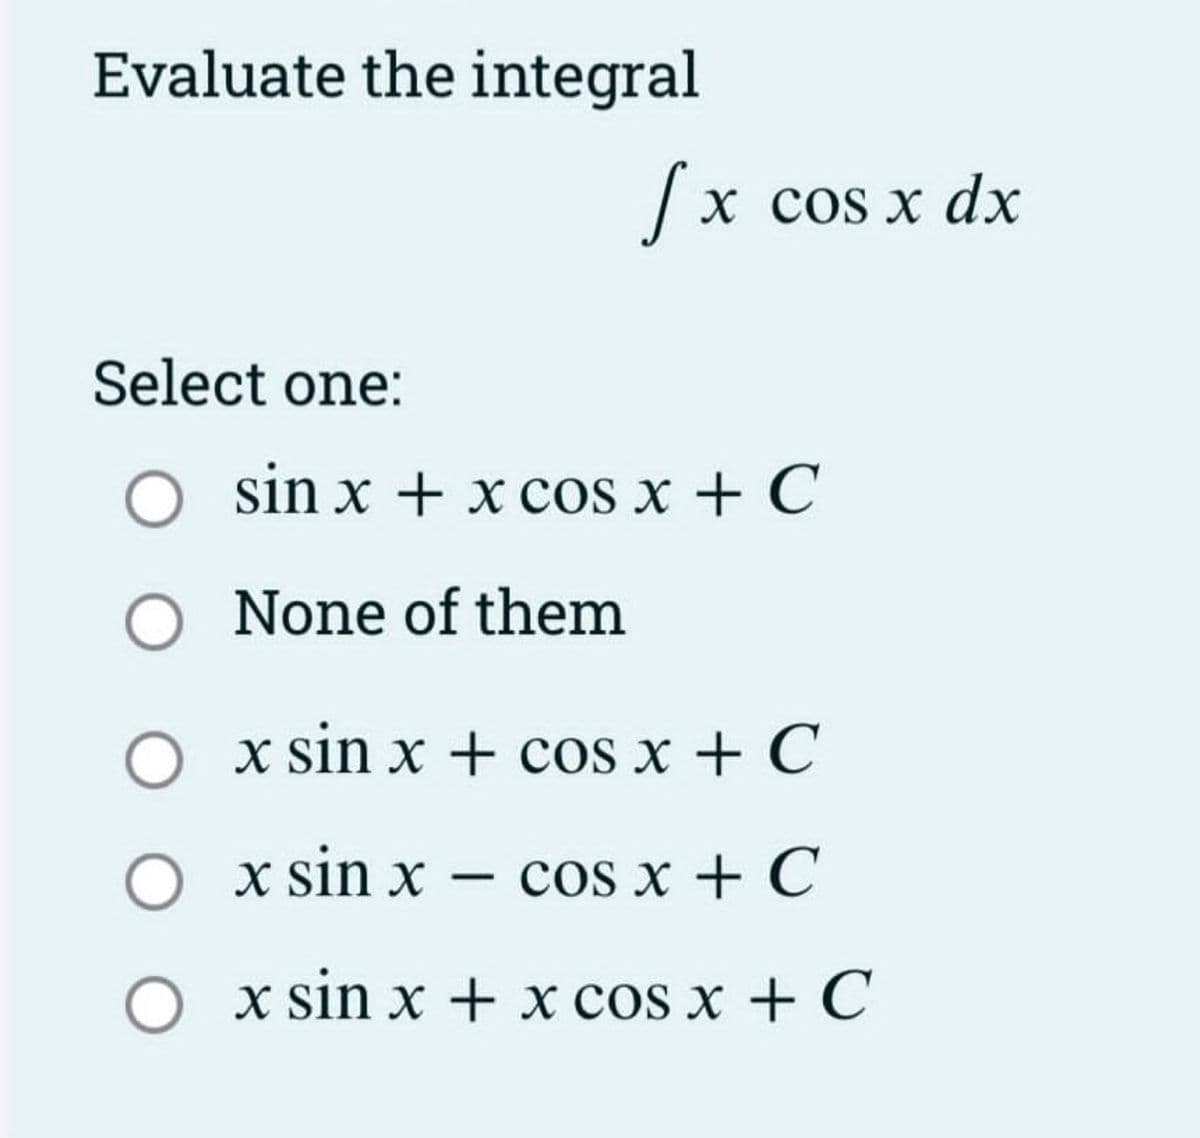 Evaluate the integral
fx cos x dx
Select one:
O sin x + x cos x + C
O None of them
O x sin x + cos x + C
O x sin x COS X + C
O x sin x + x cos x + C
-